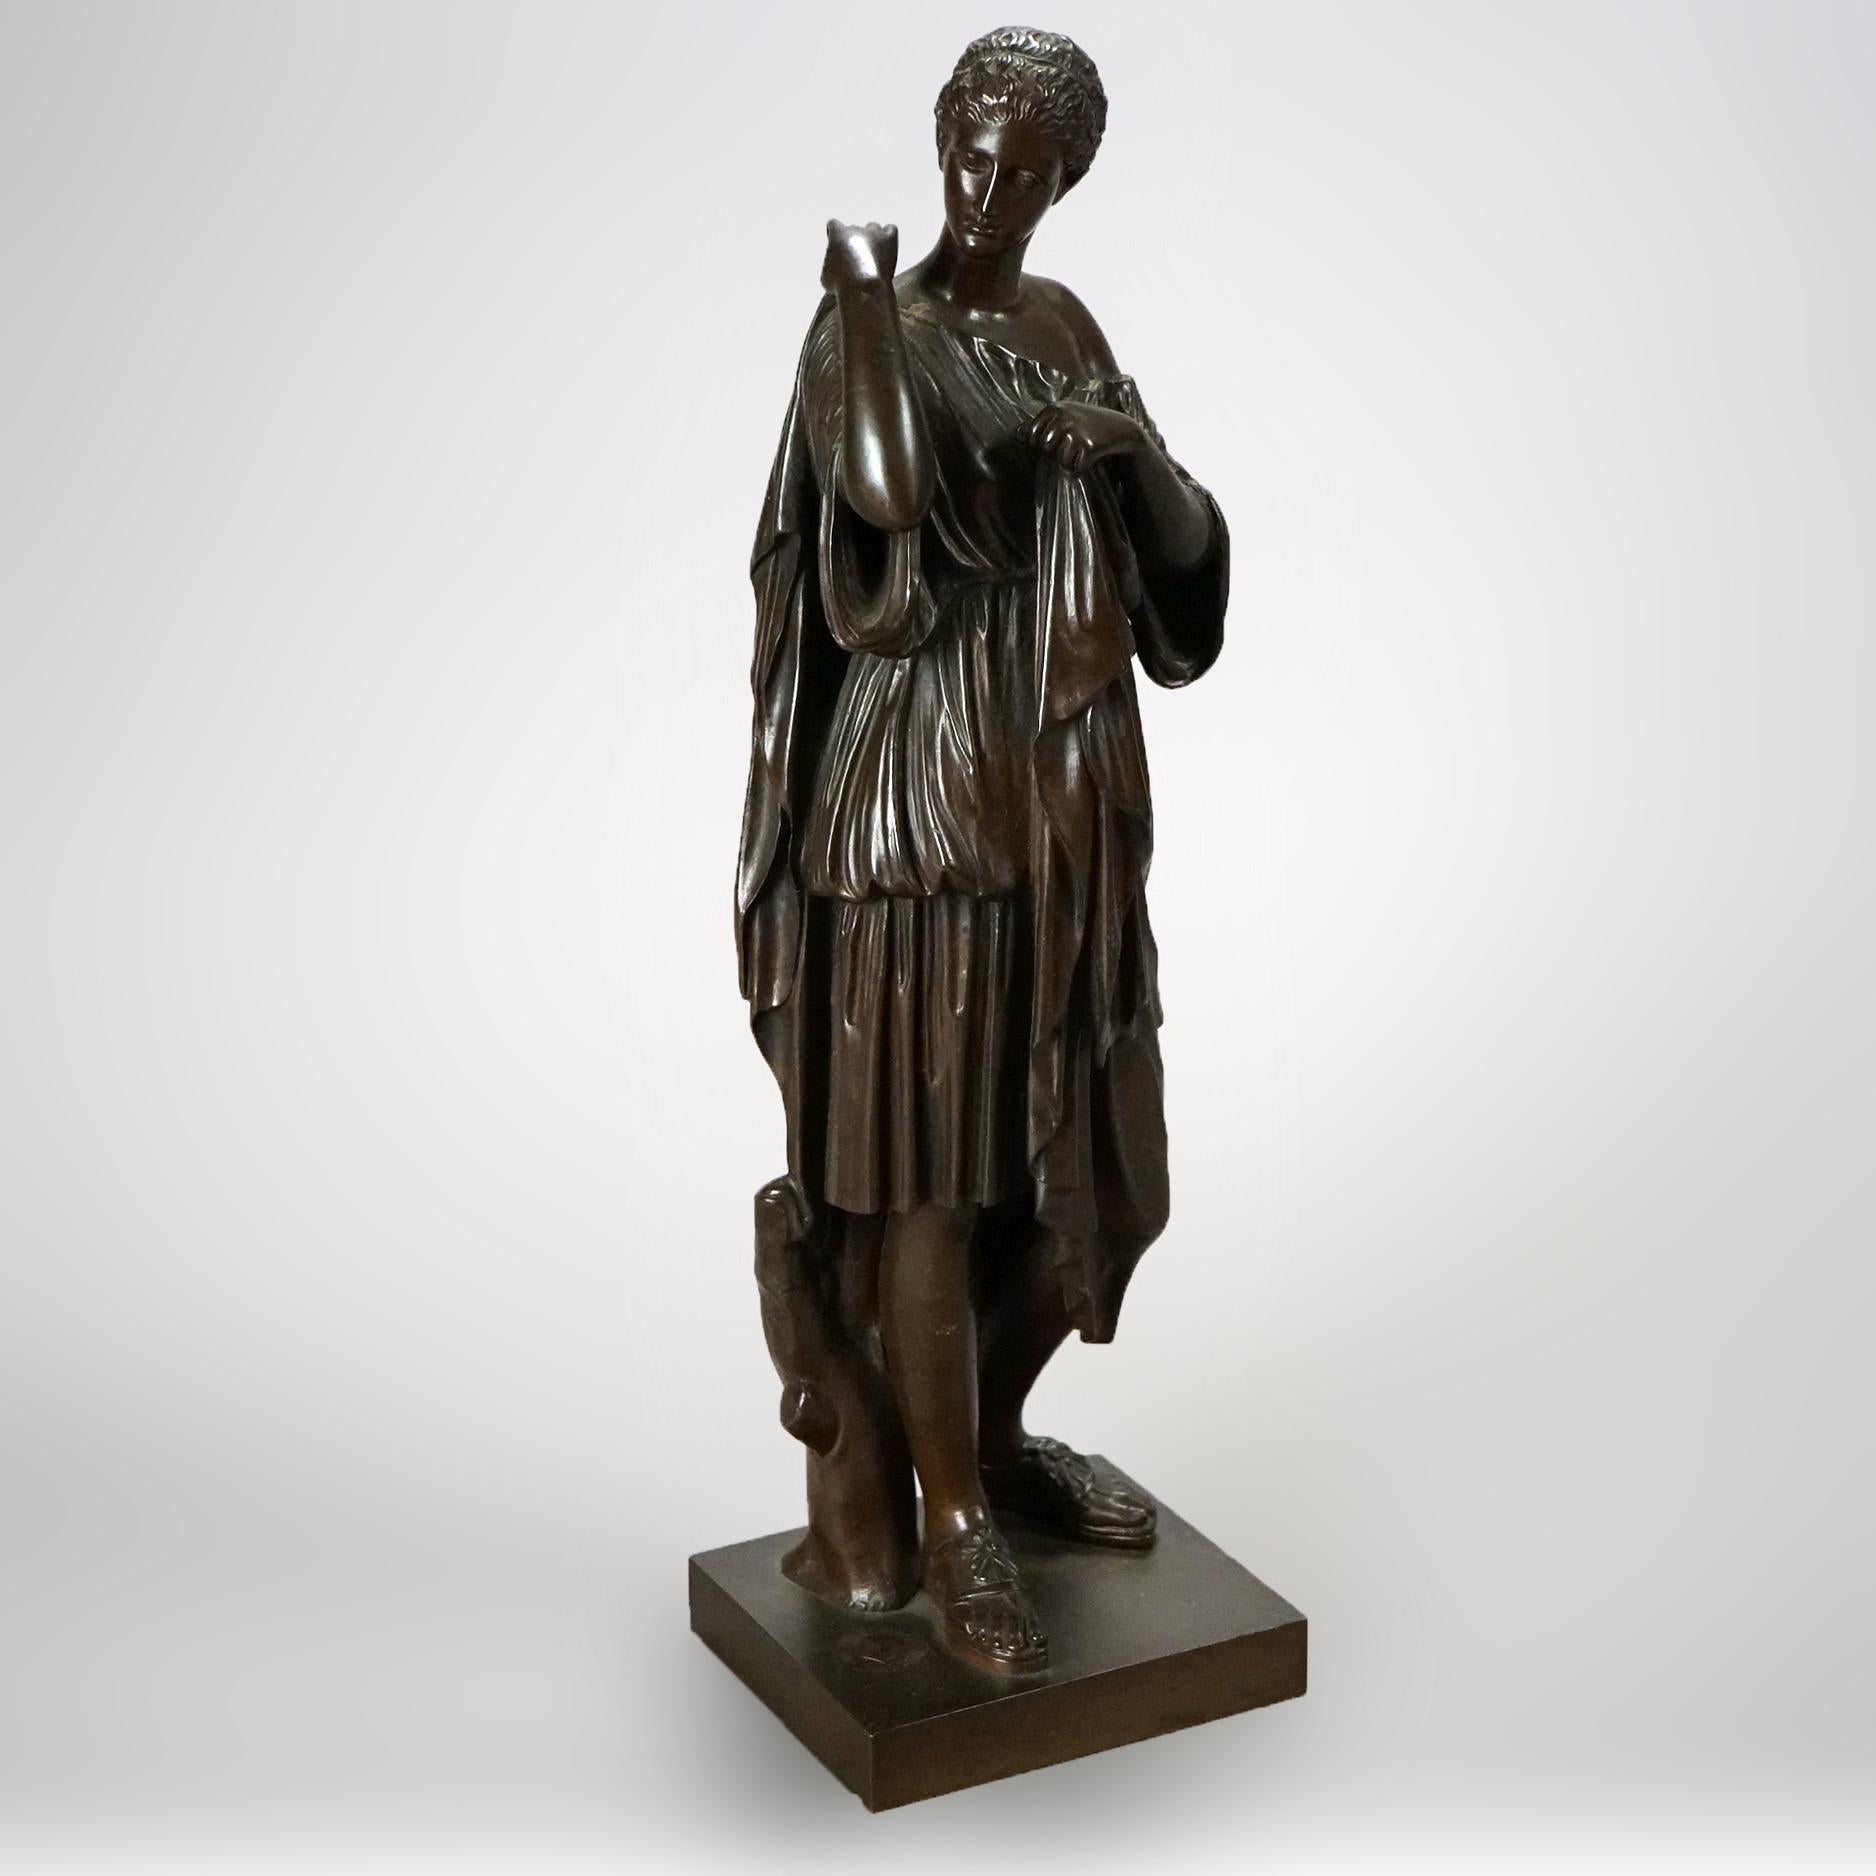 Cast Antique French Neoclassical Bronze, Statue of a Classical Woman, Circa 1890